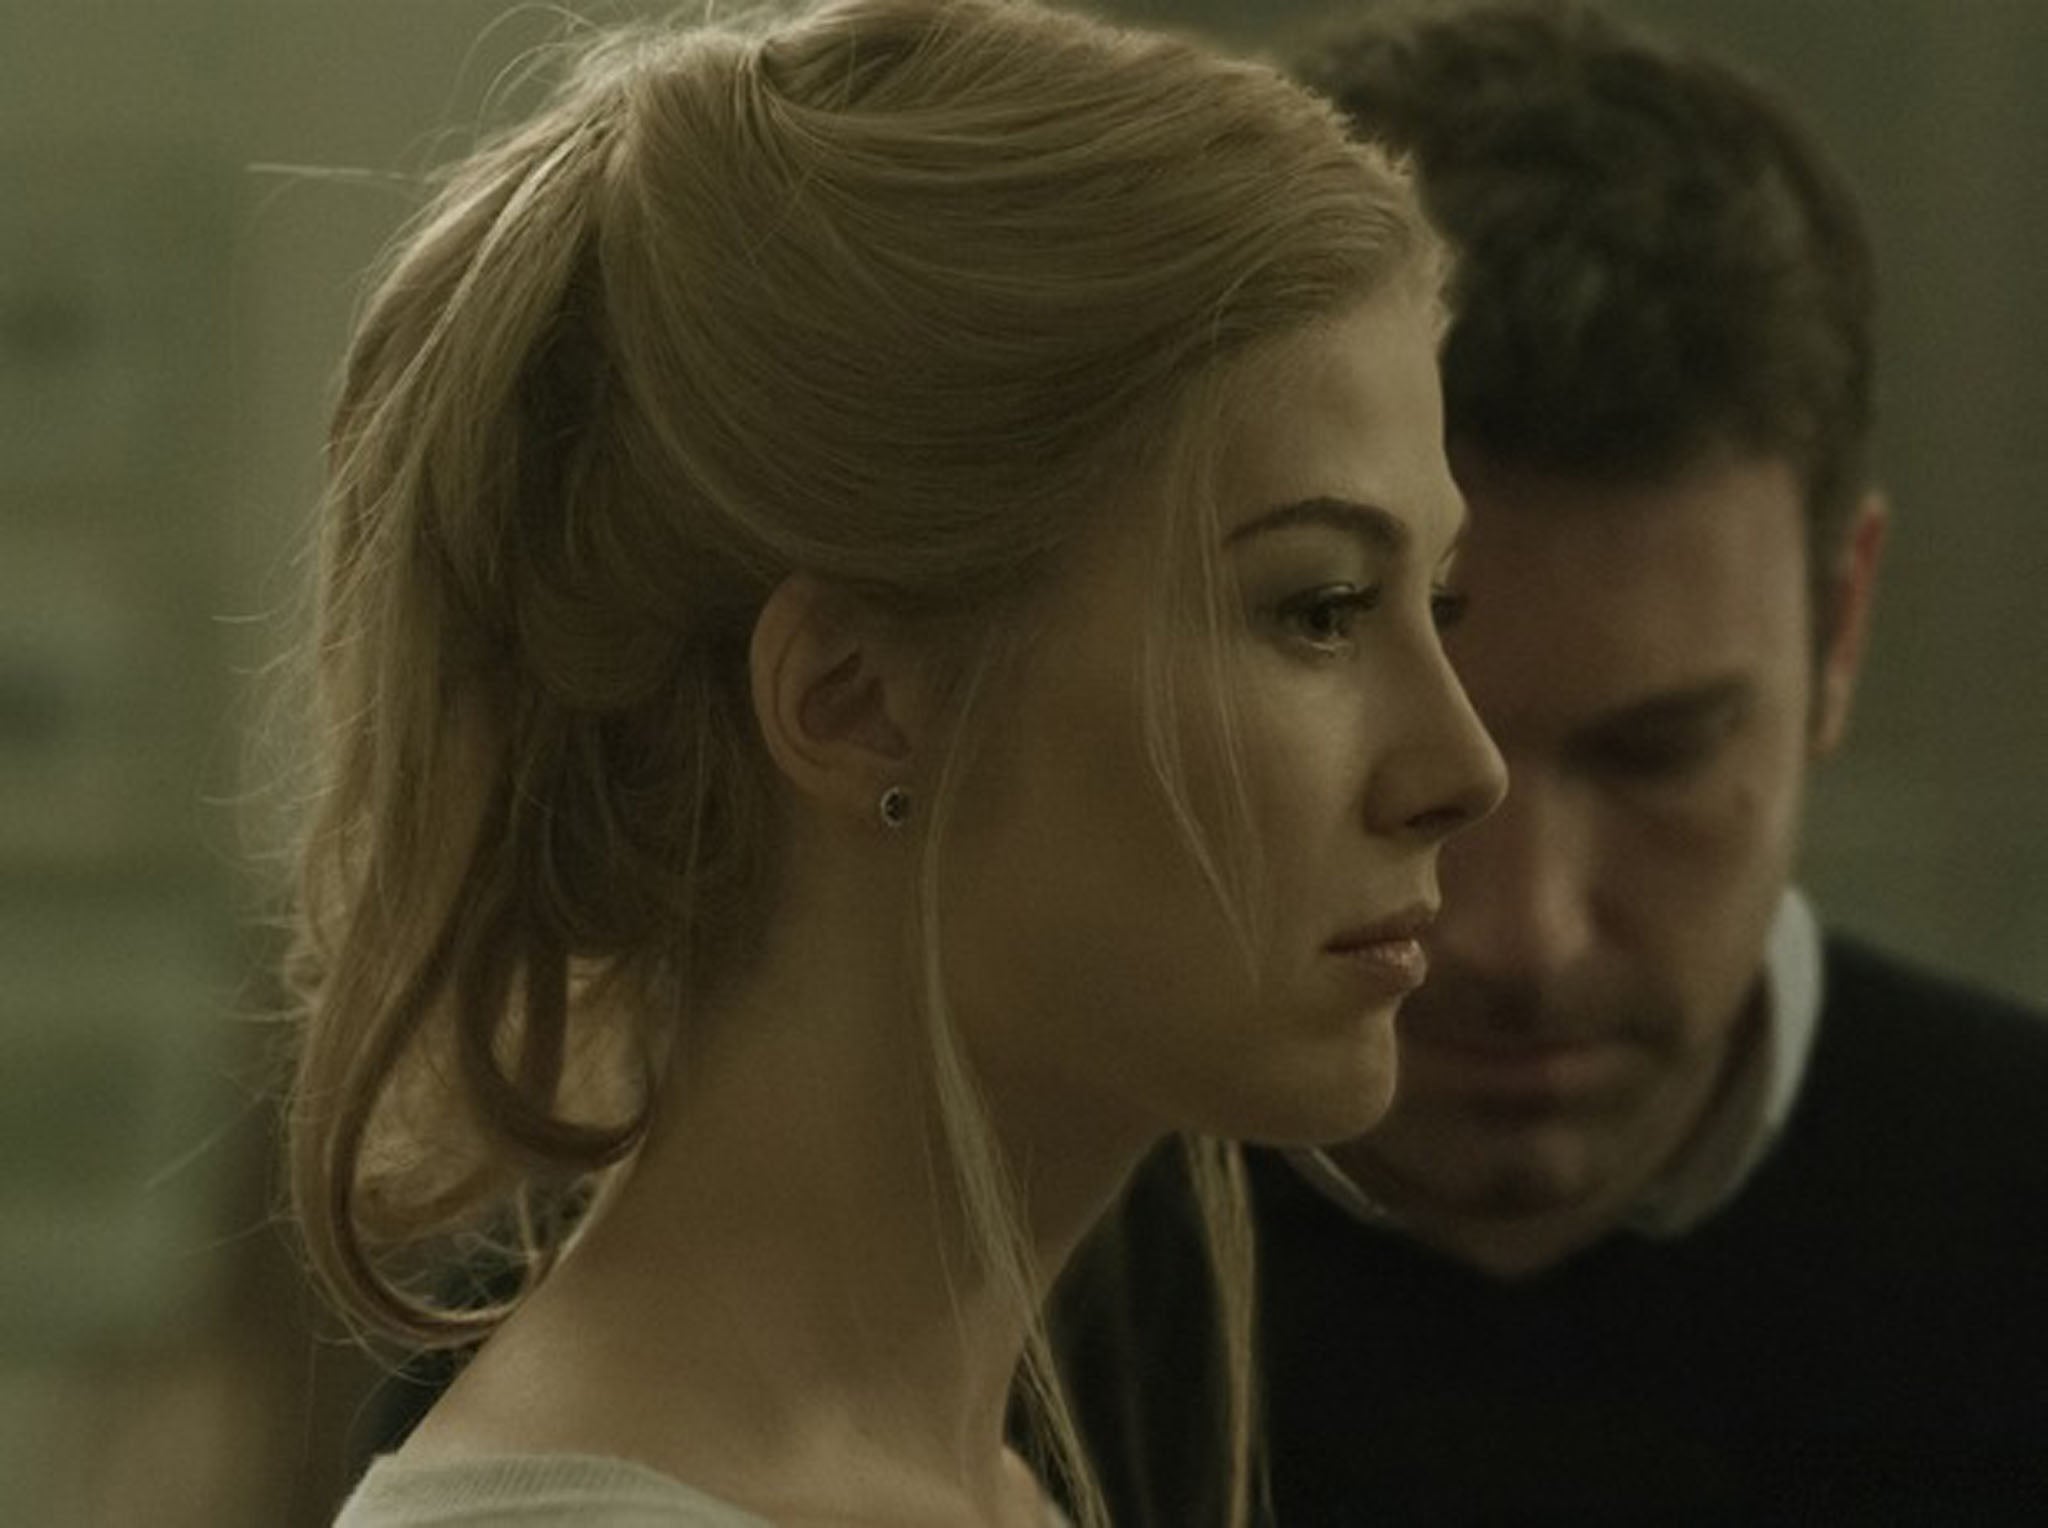 'Gone Girl' by Gillian Flynn: Told by two alternating, unreliable, narrators whose marriage has gone wrong. The reader doesn't know if a murder has taken place, let alone who did it. The movie (starring Rosamund Pike) is good, too